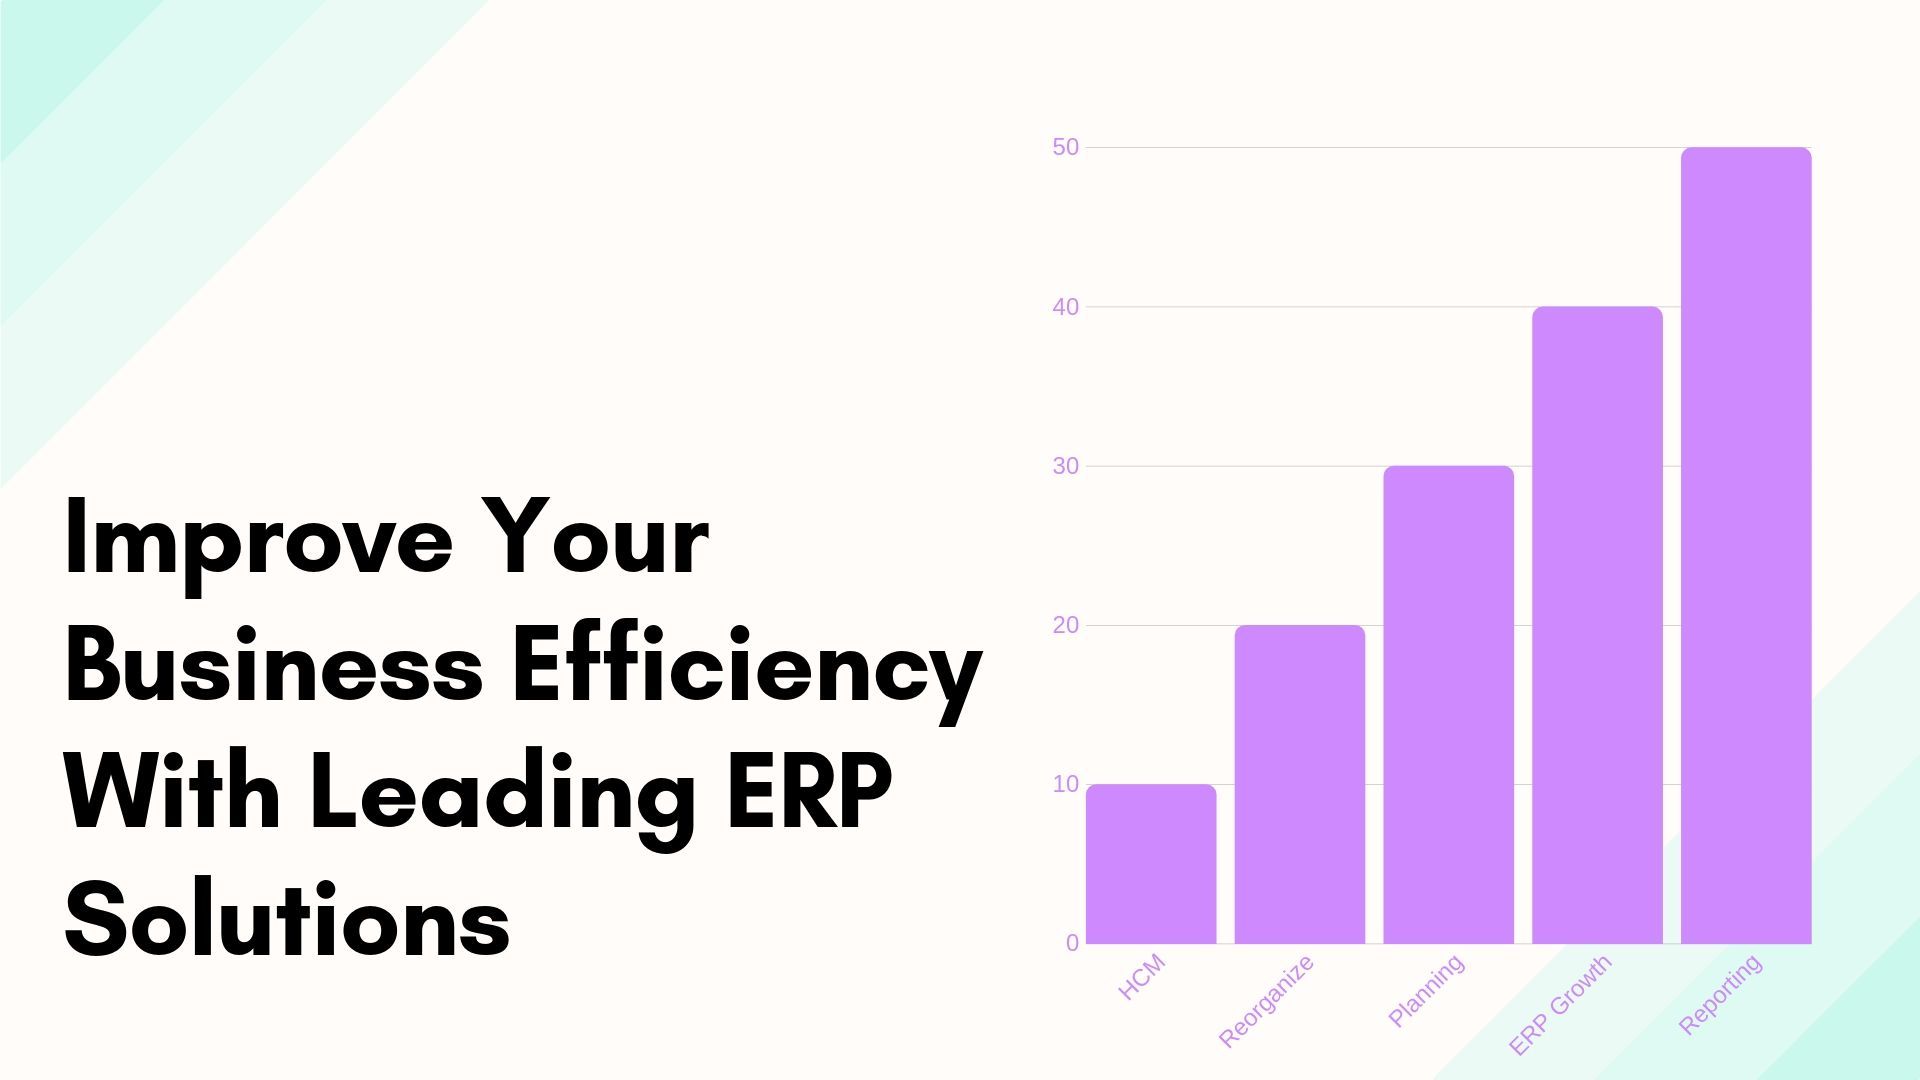 Improve Your Business Efficiency With Leading ERP Solutions